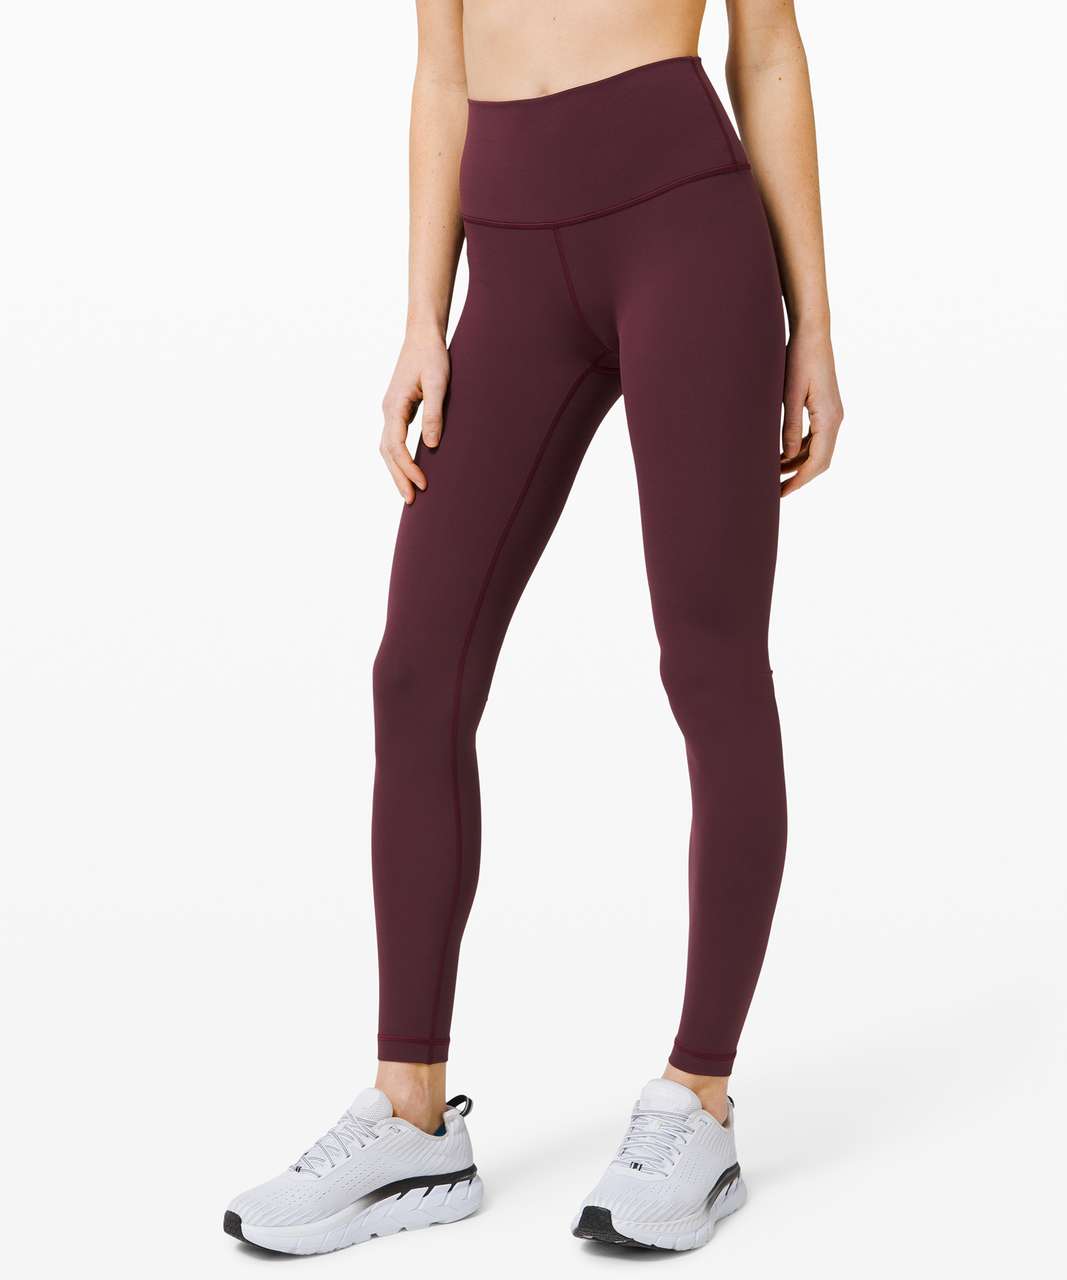 Lululemon Wunder Under High-Rise Tight 31" *Full-On Luxtreme - Cassis